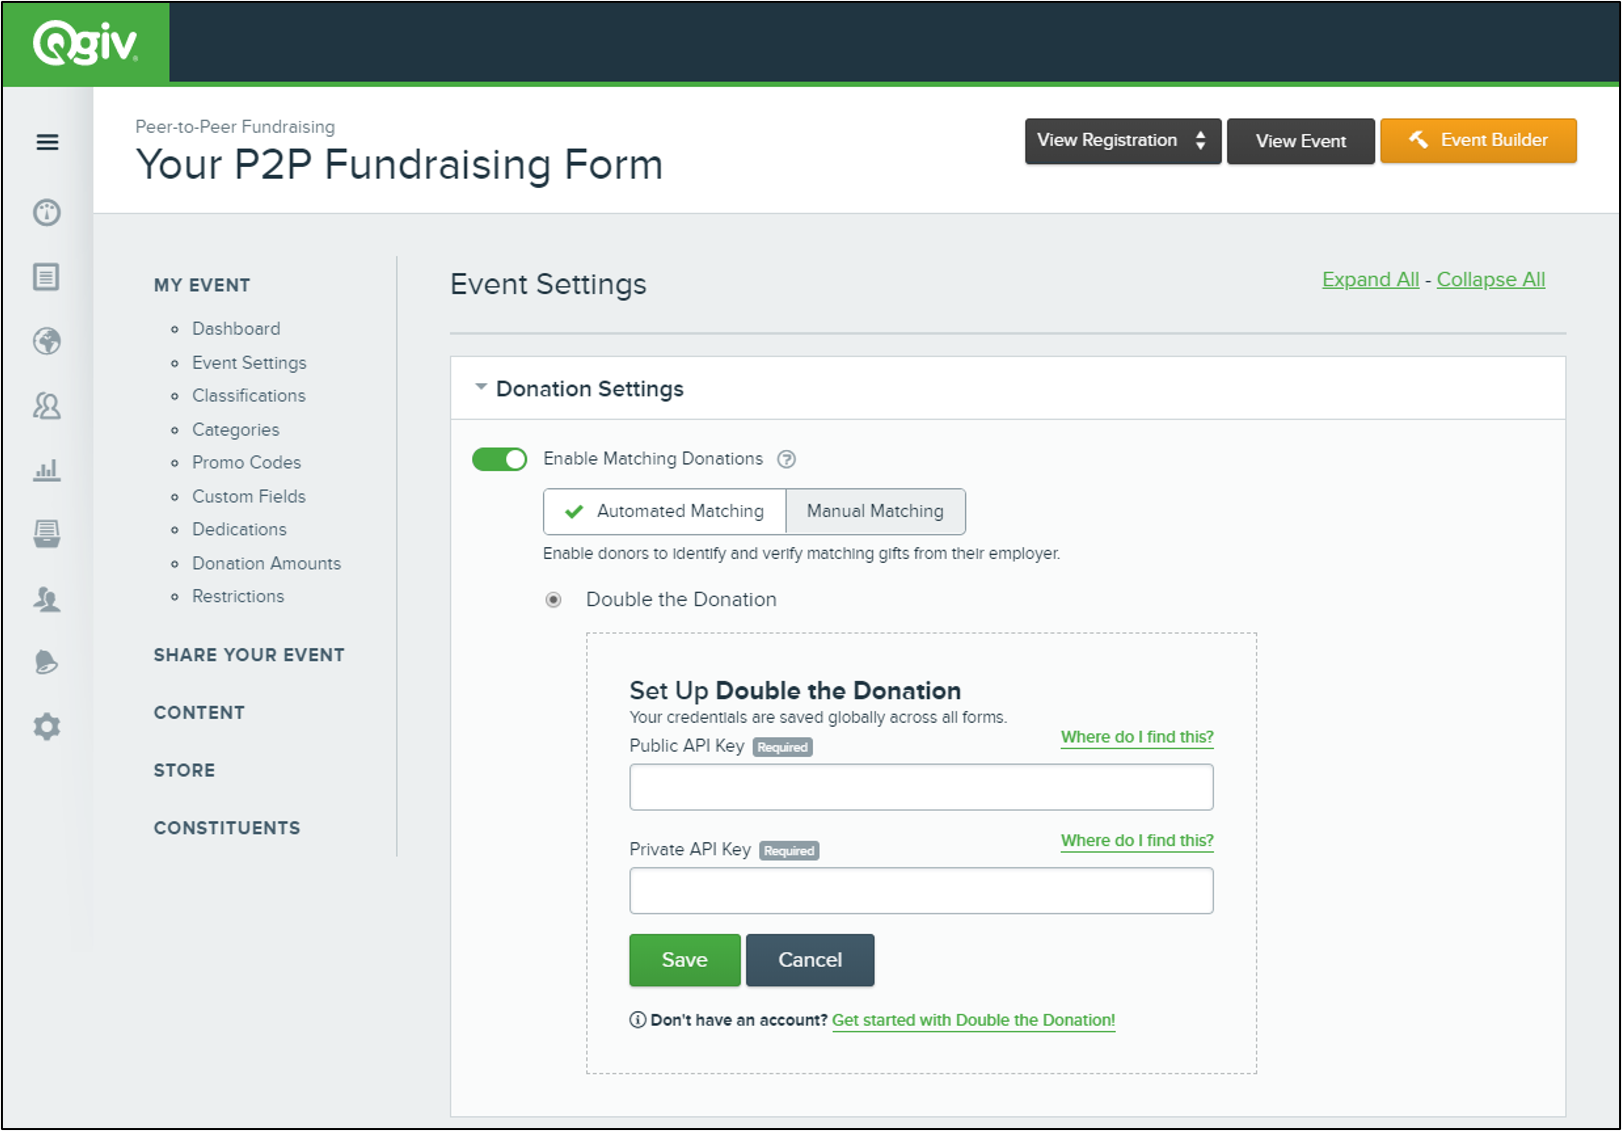 360MatchPro is now available on Qgiv peer-to-peer fundraising forms.